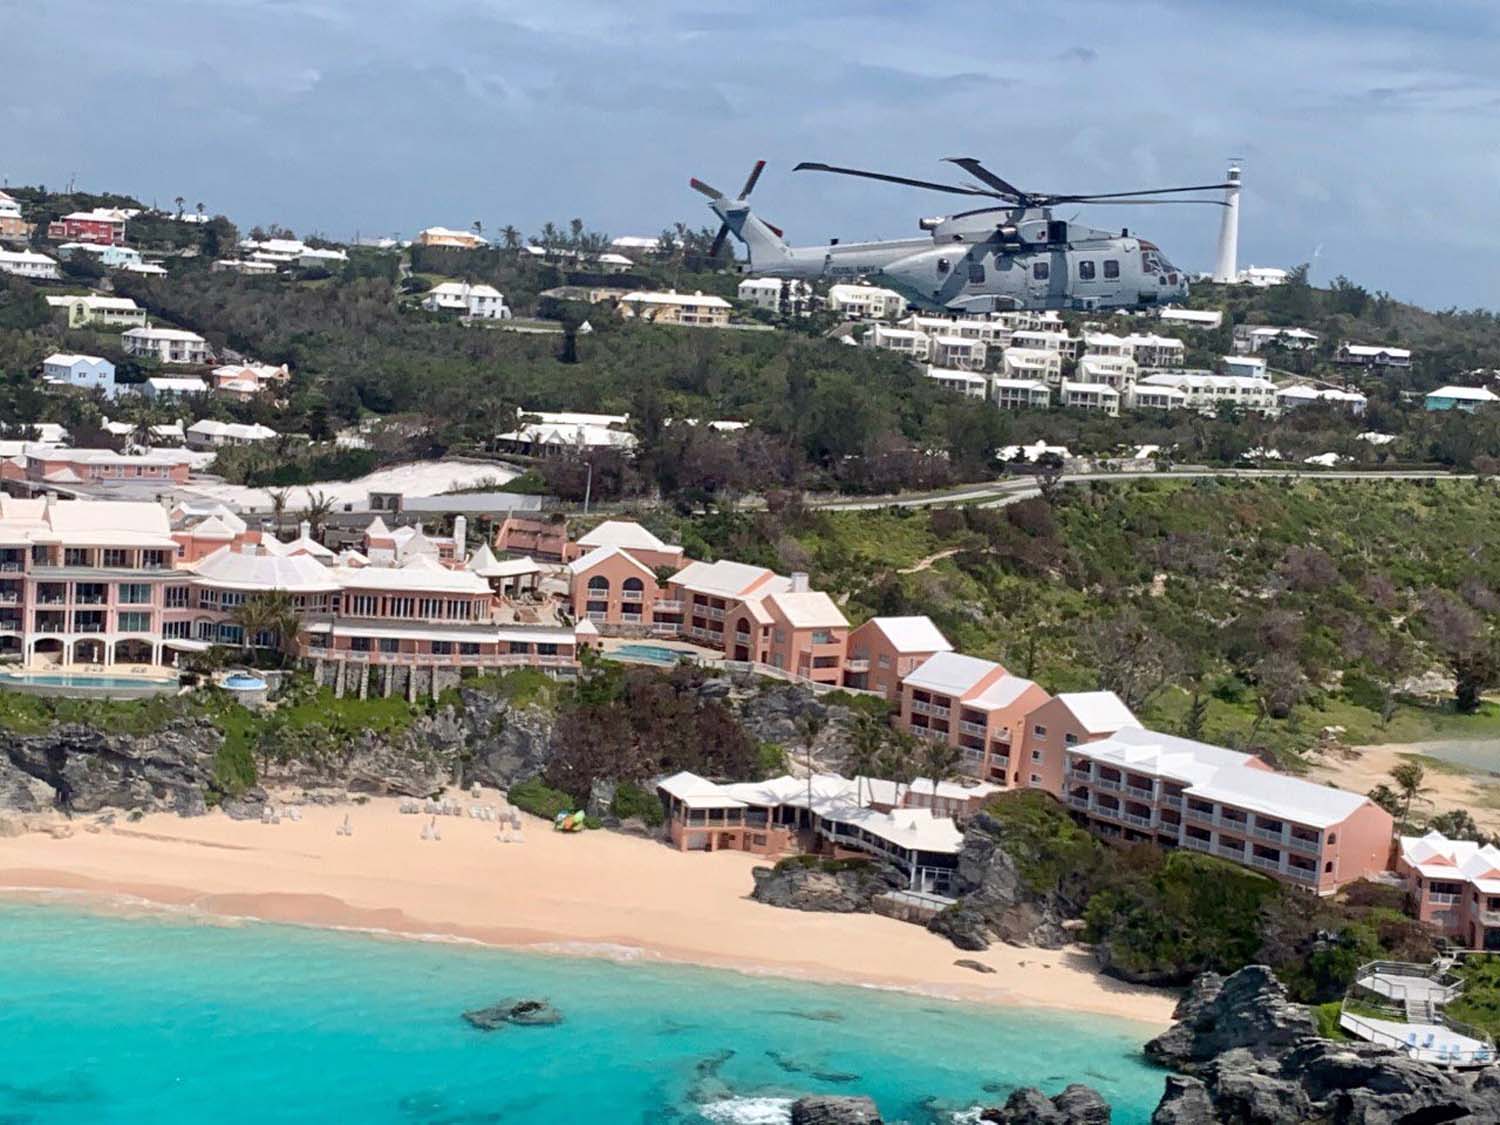 Commando Merlin helicopter carry out recce sorties over Bermuda